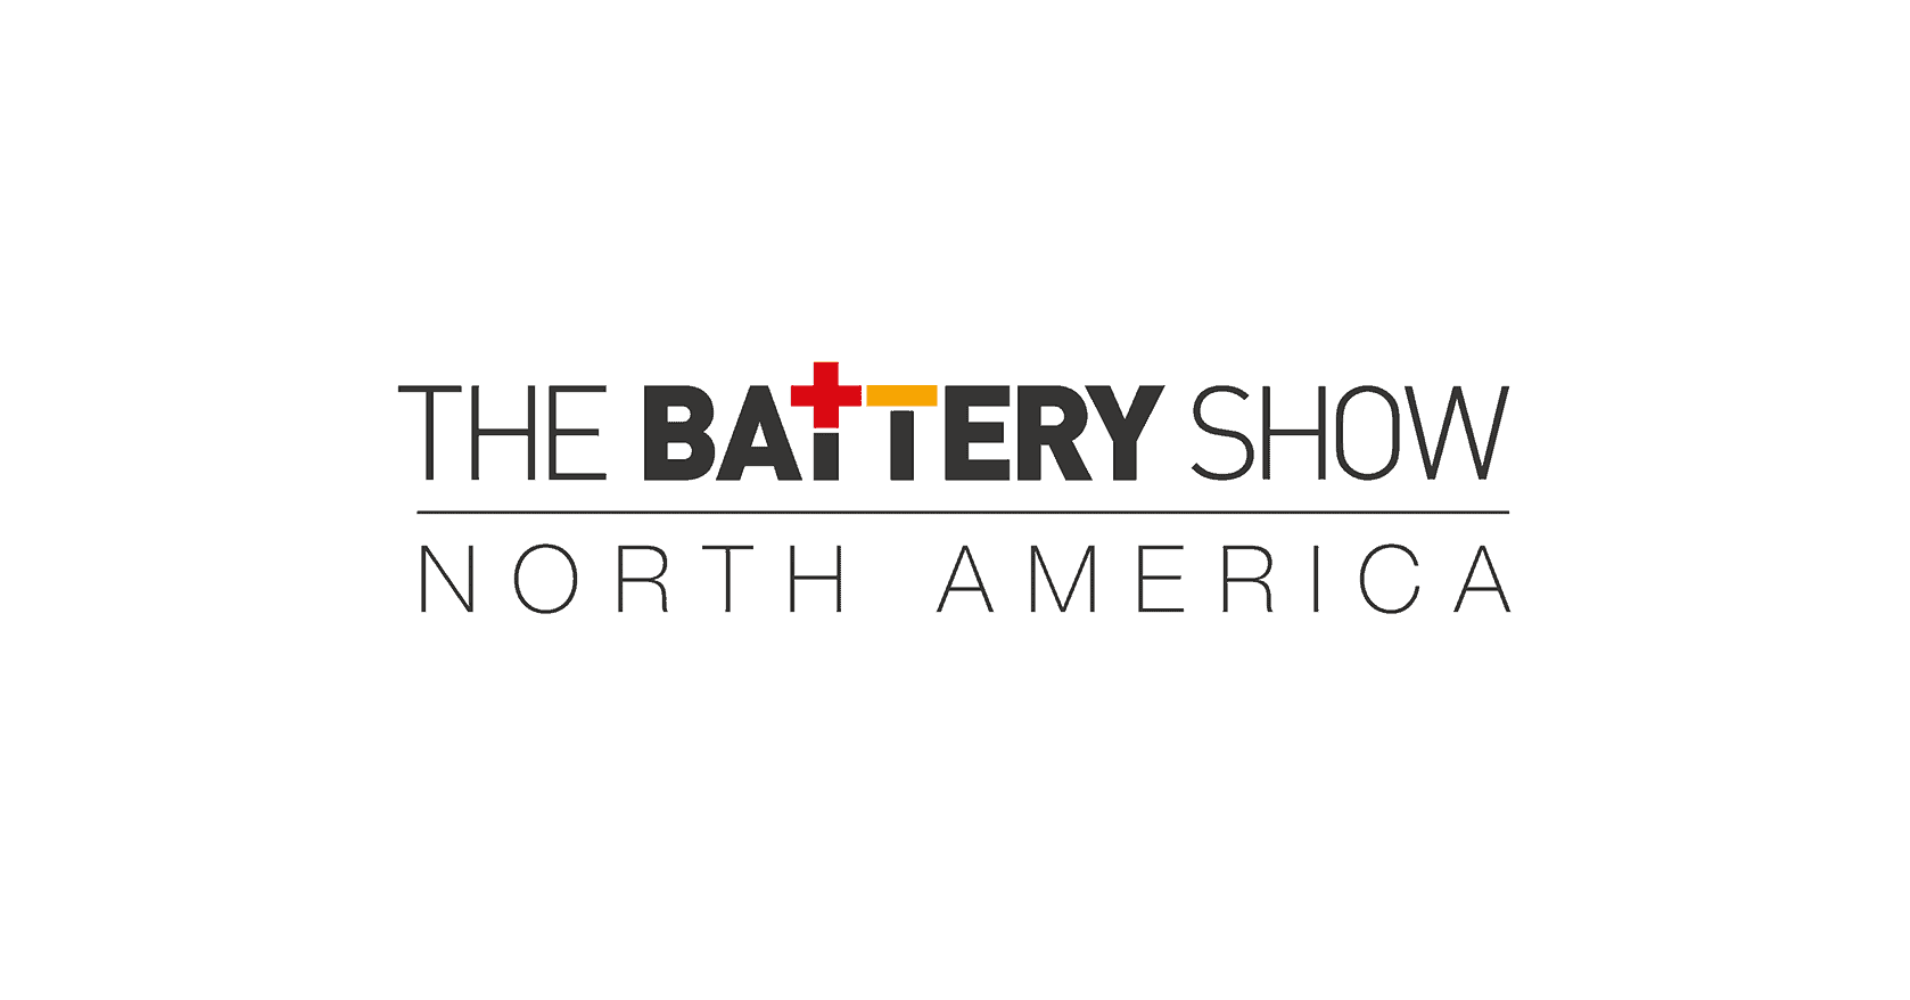 JOT Automation to exhibit at The Battery Show North America 2022